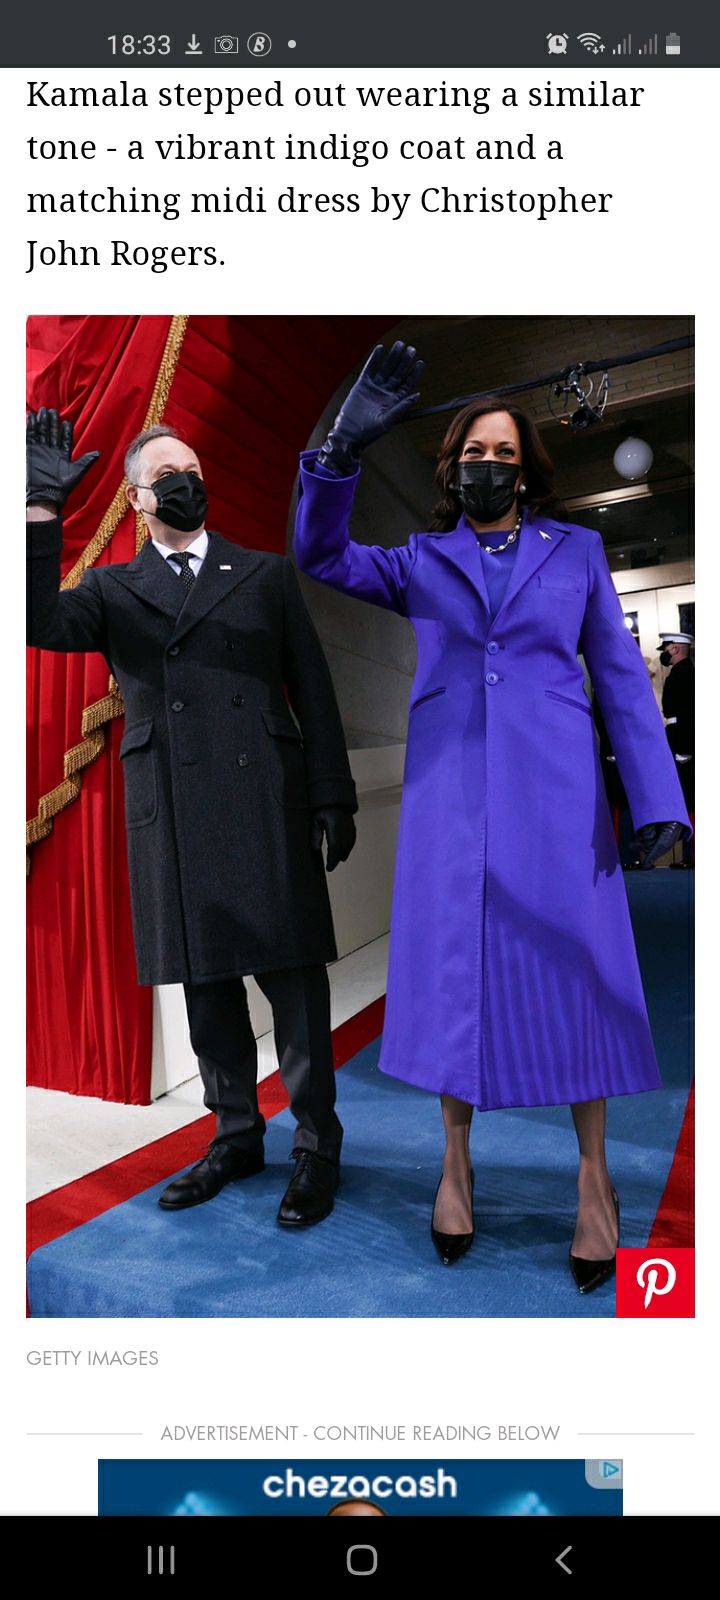 Michelle Obama's inauguration outfit has a symbolic meaning